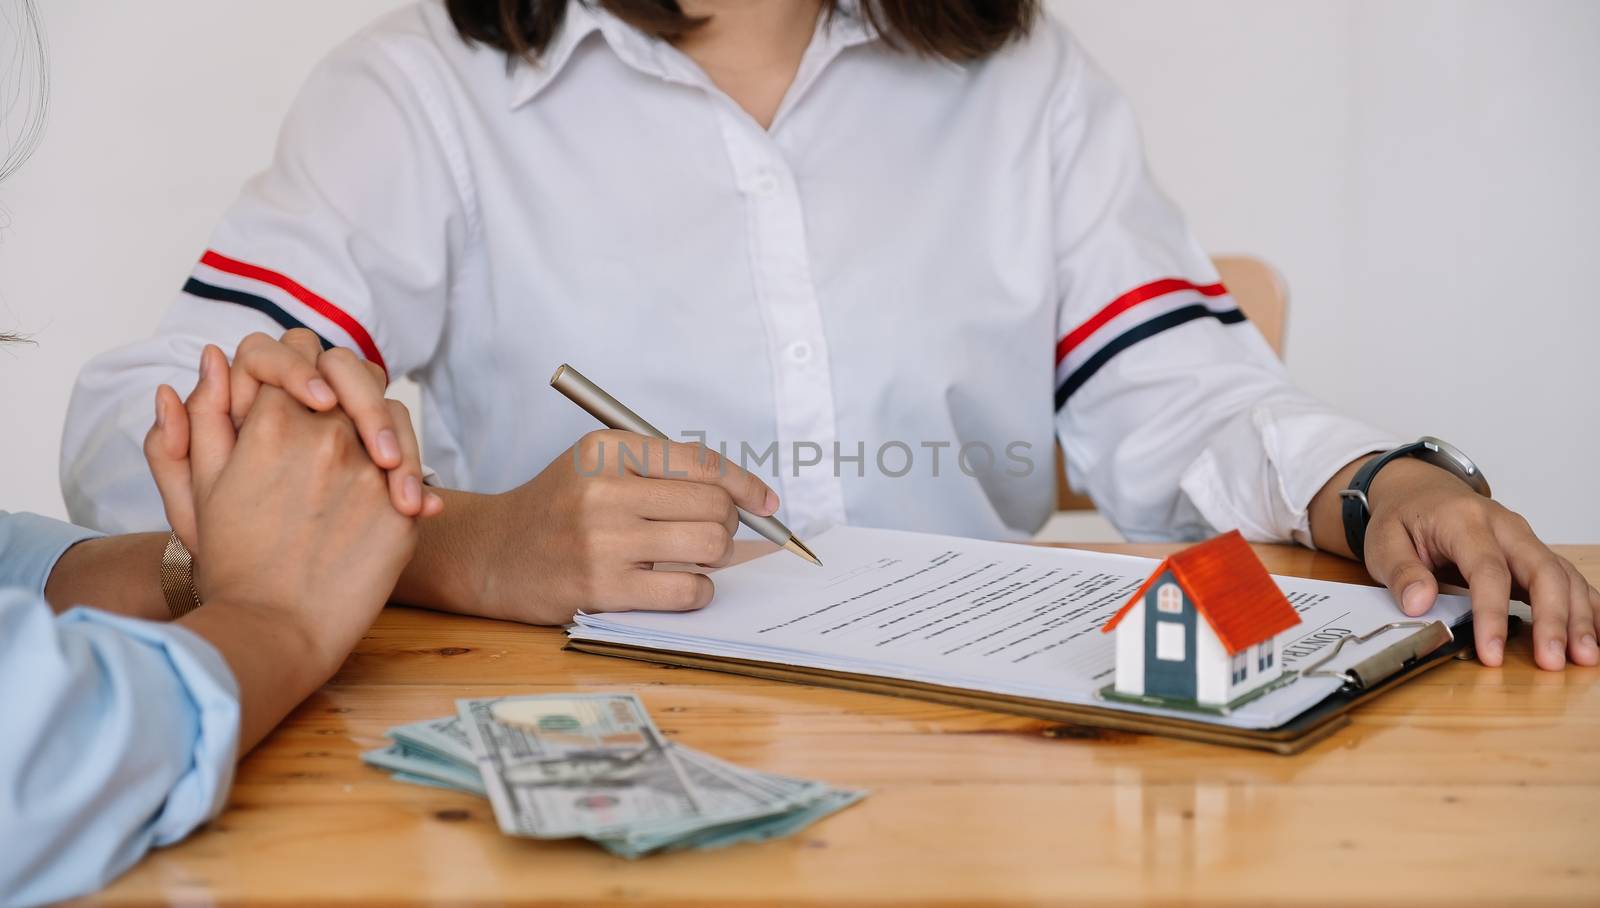 Cropped image of real estate agent assisting client to sign contract paper at desk with house model.